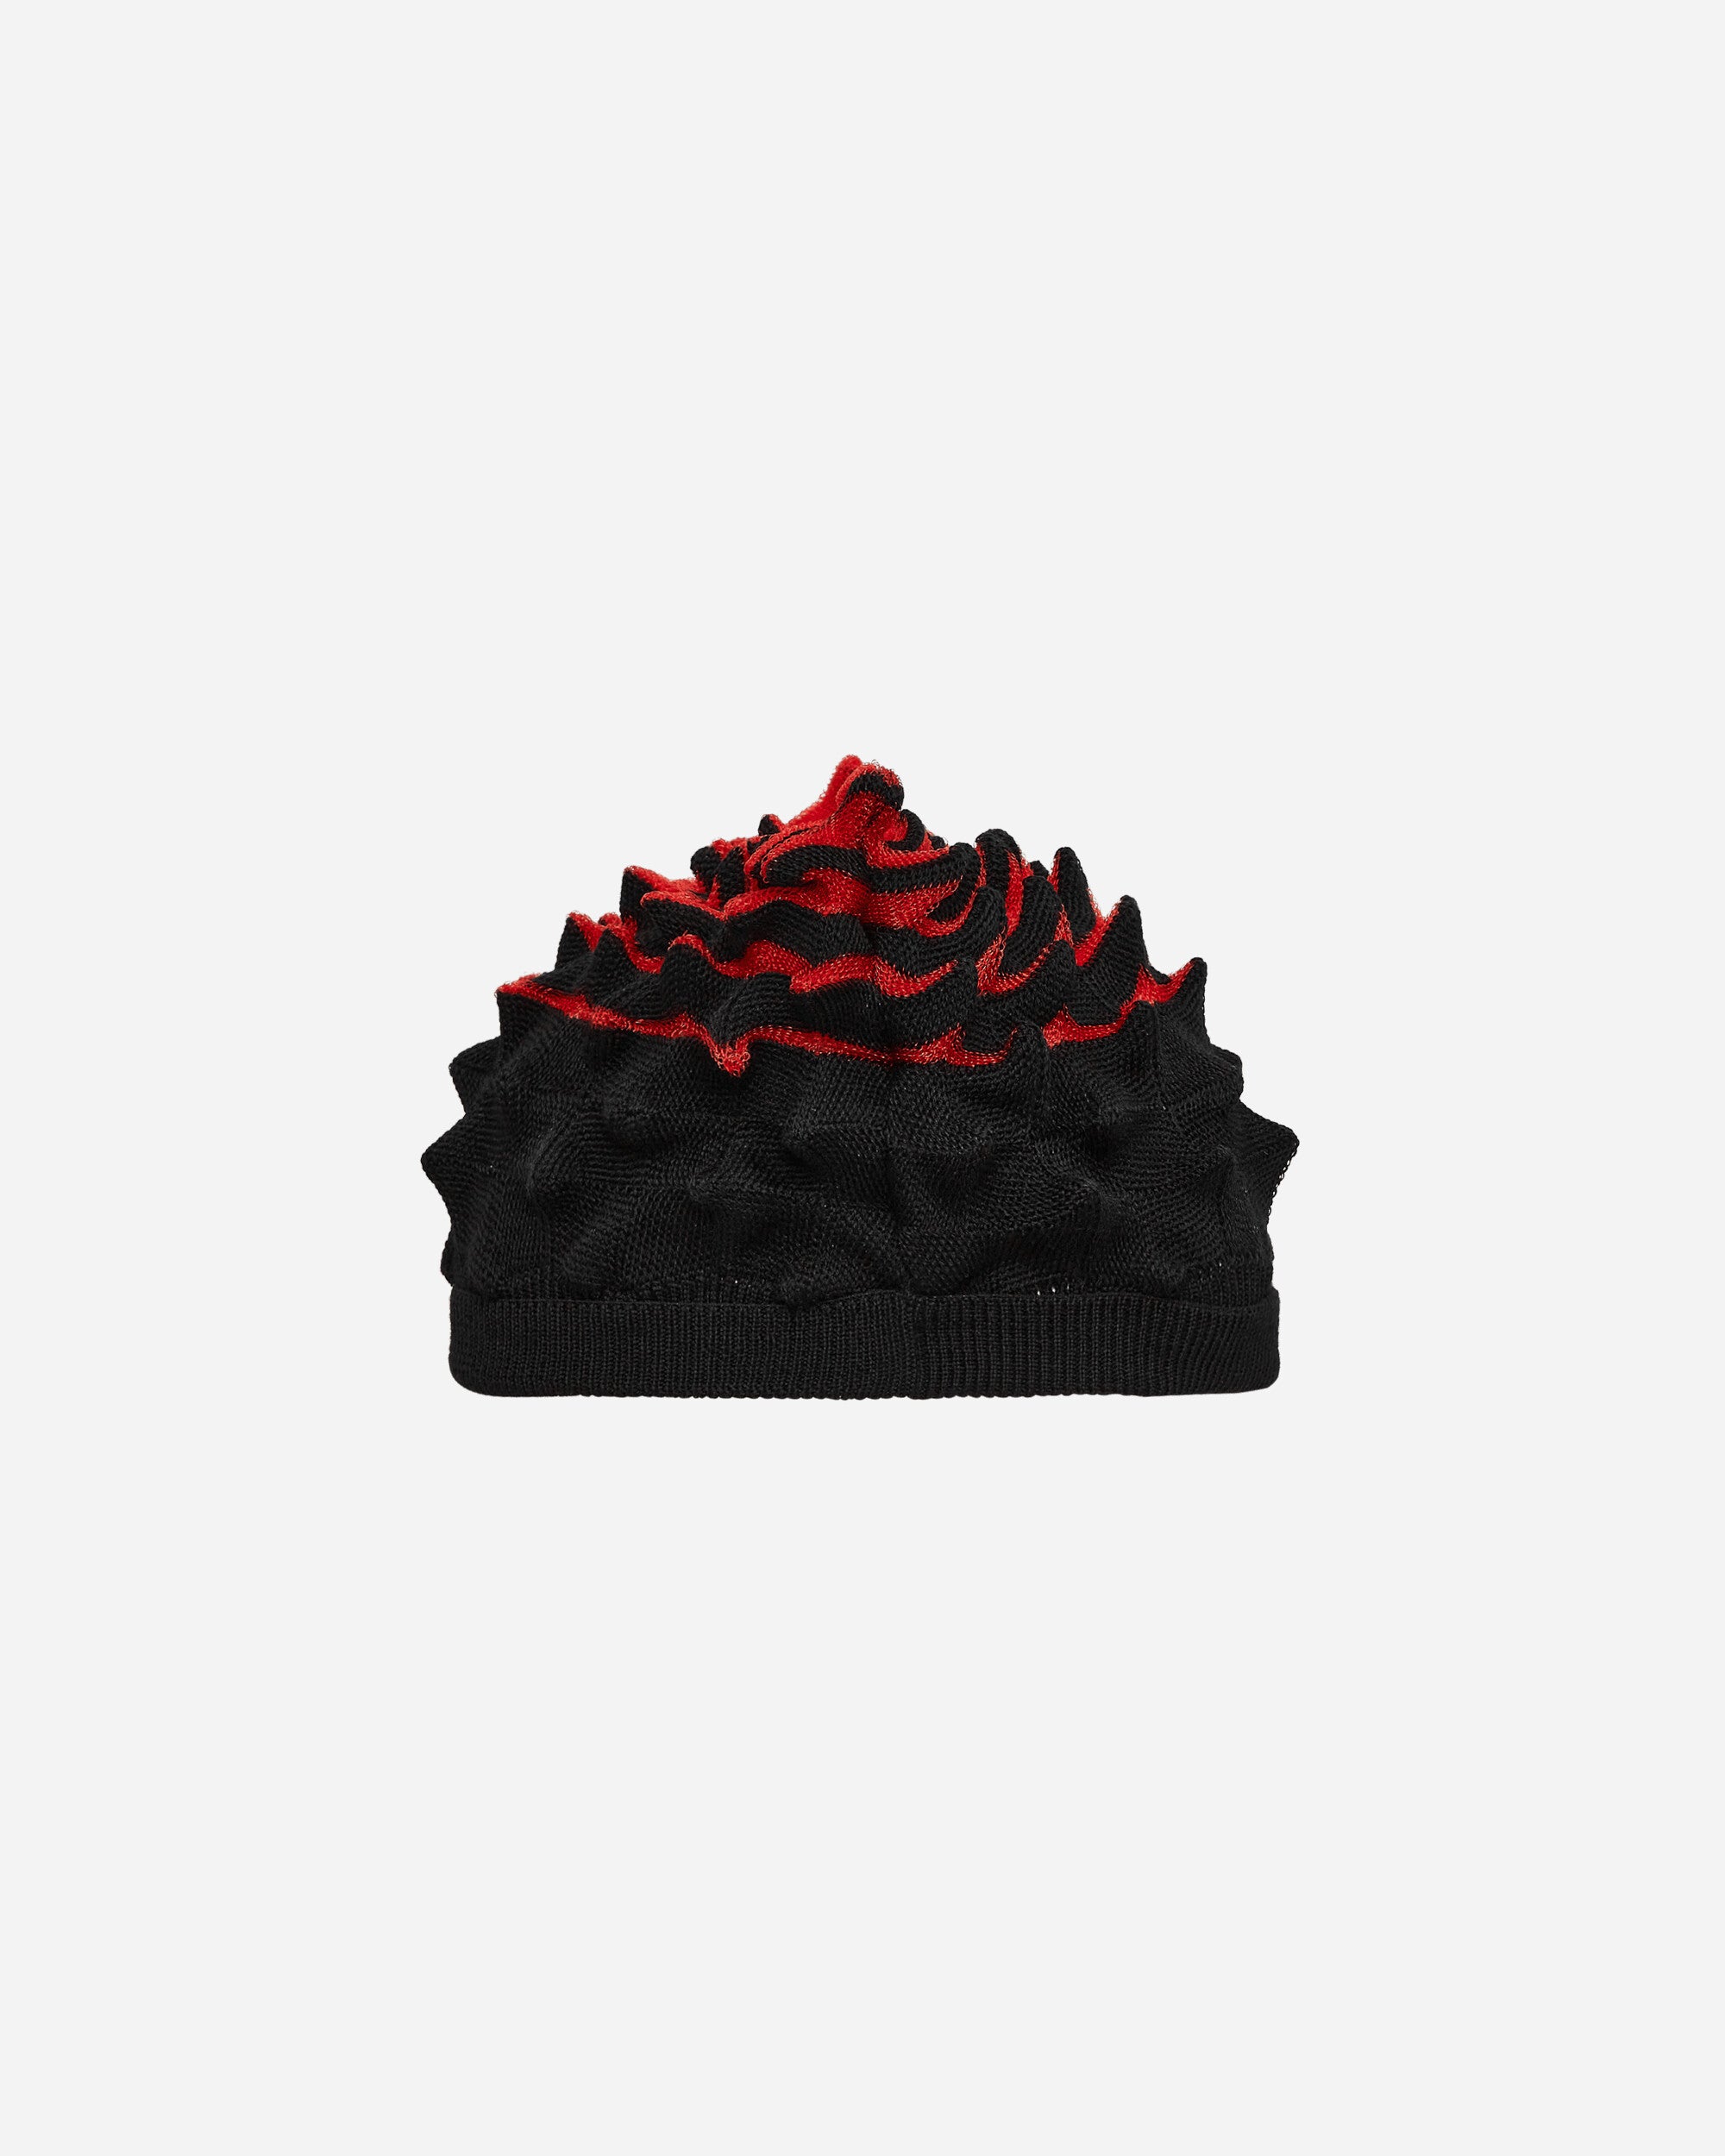 Chet Lo Wmns Spiky Beanie Exclusive Black/Red Hats Beanies FW23CL54 1